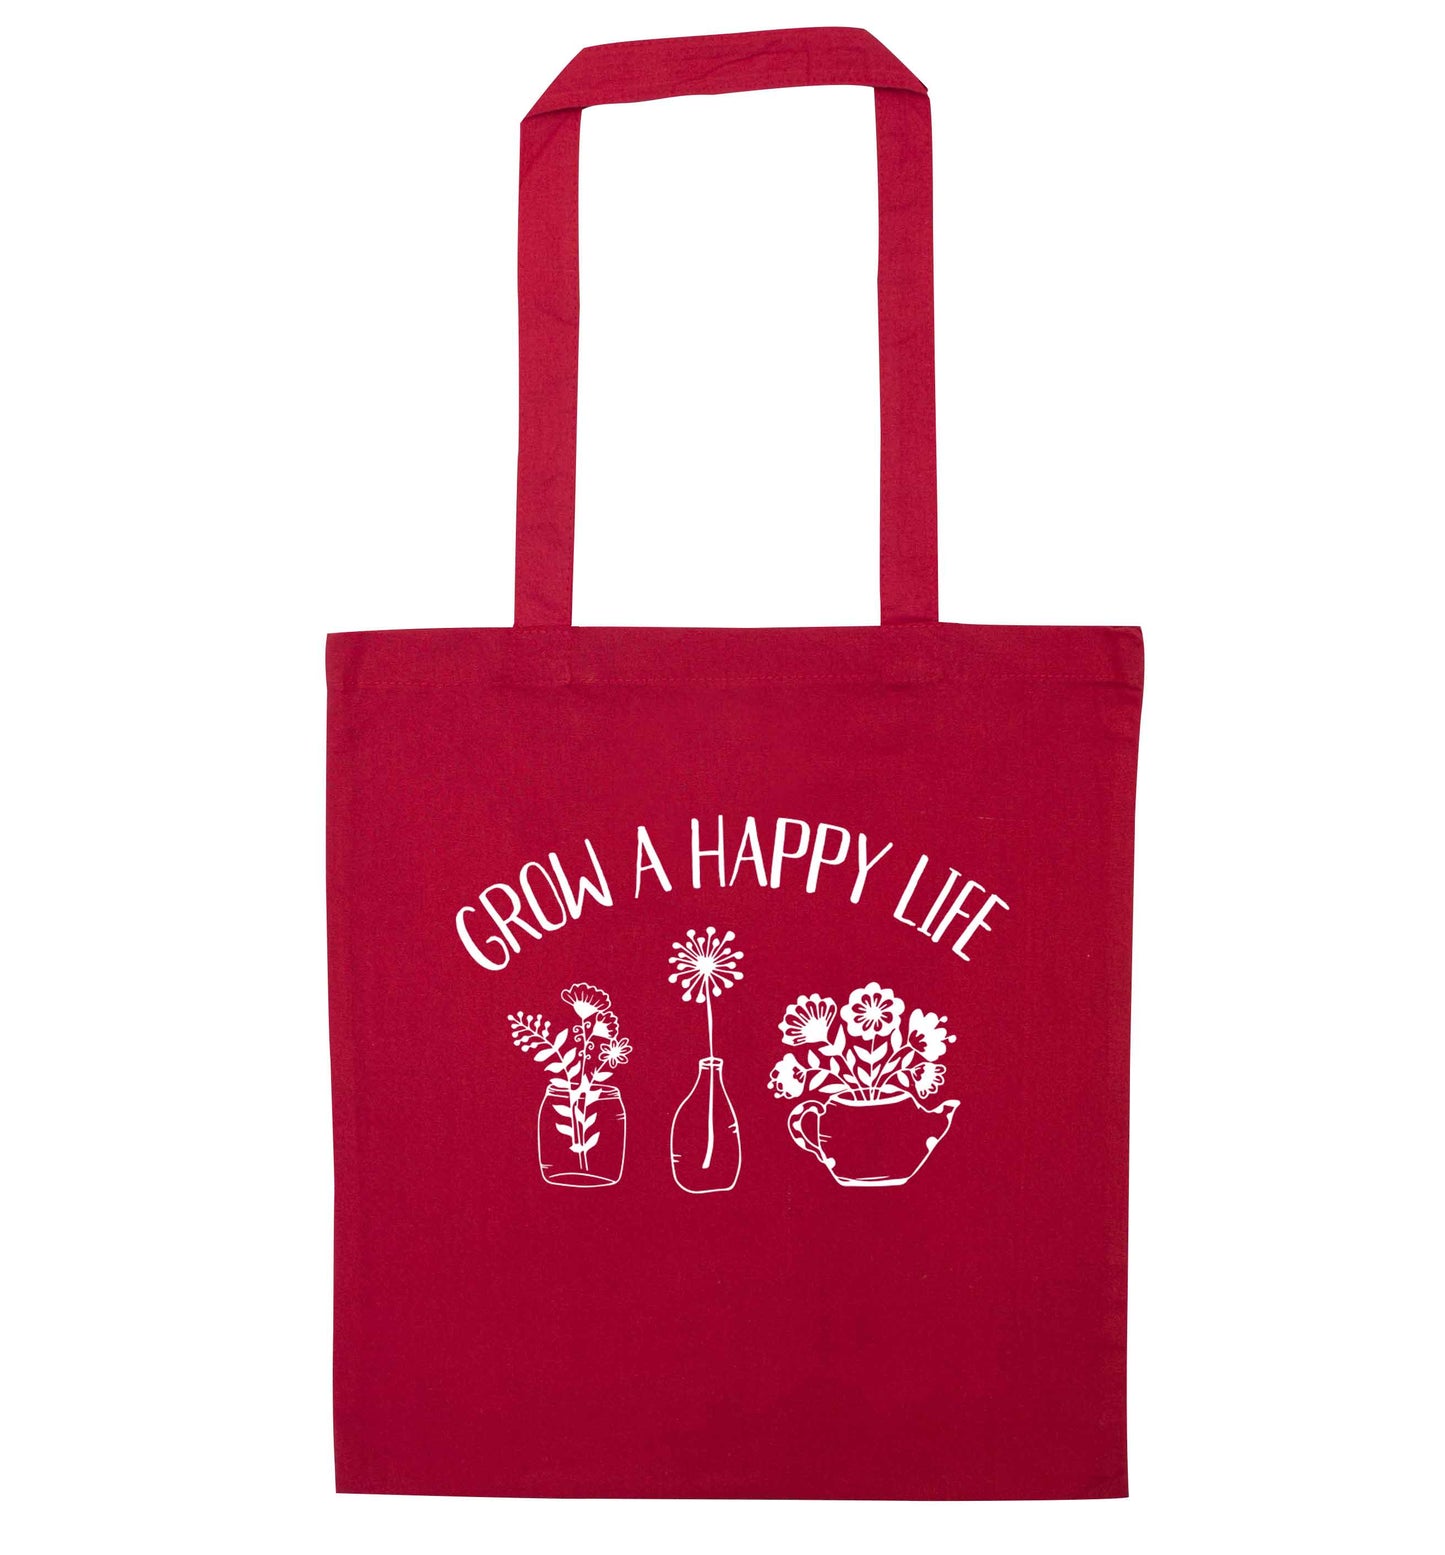 Grow a happy life red tote bag